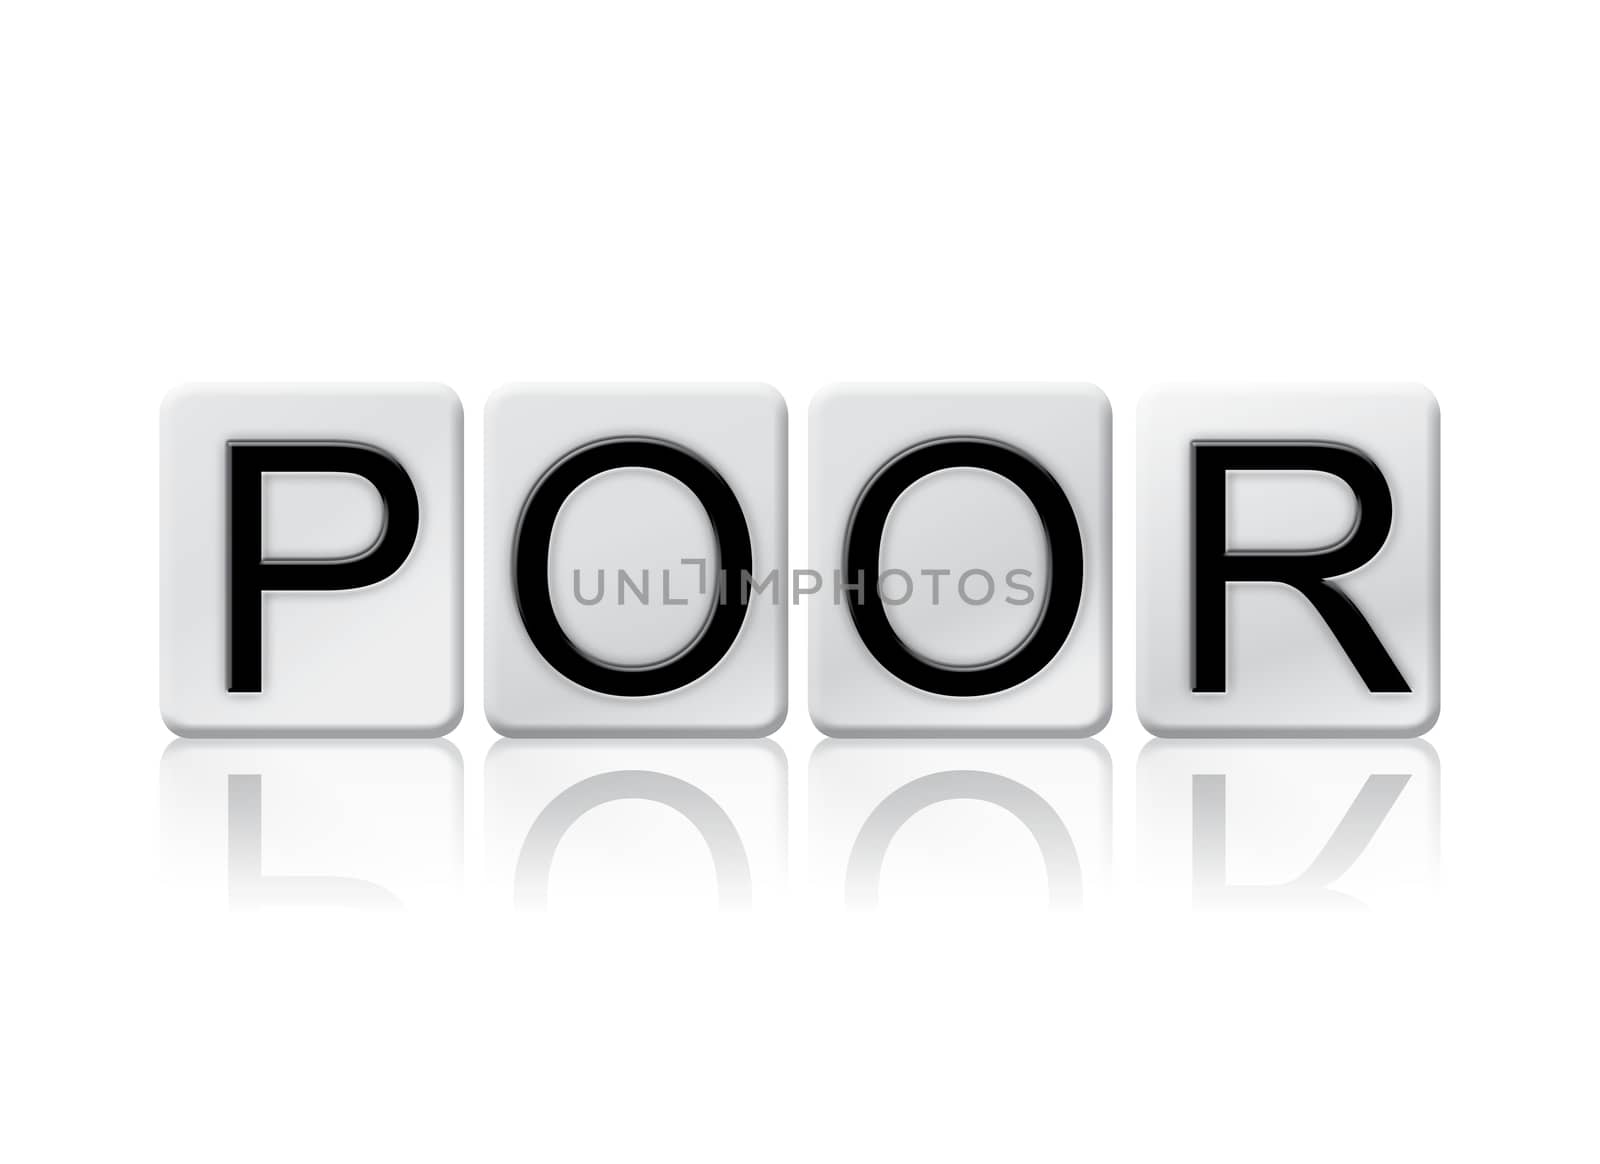 The word "Poor" written in tile letters isolated on a white background.